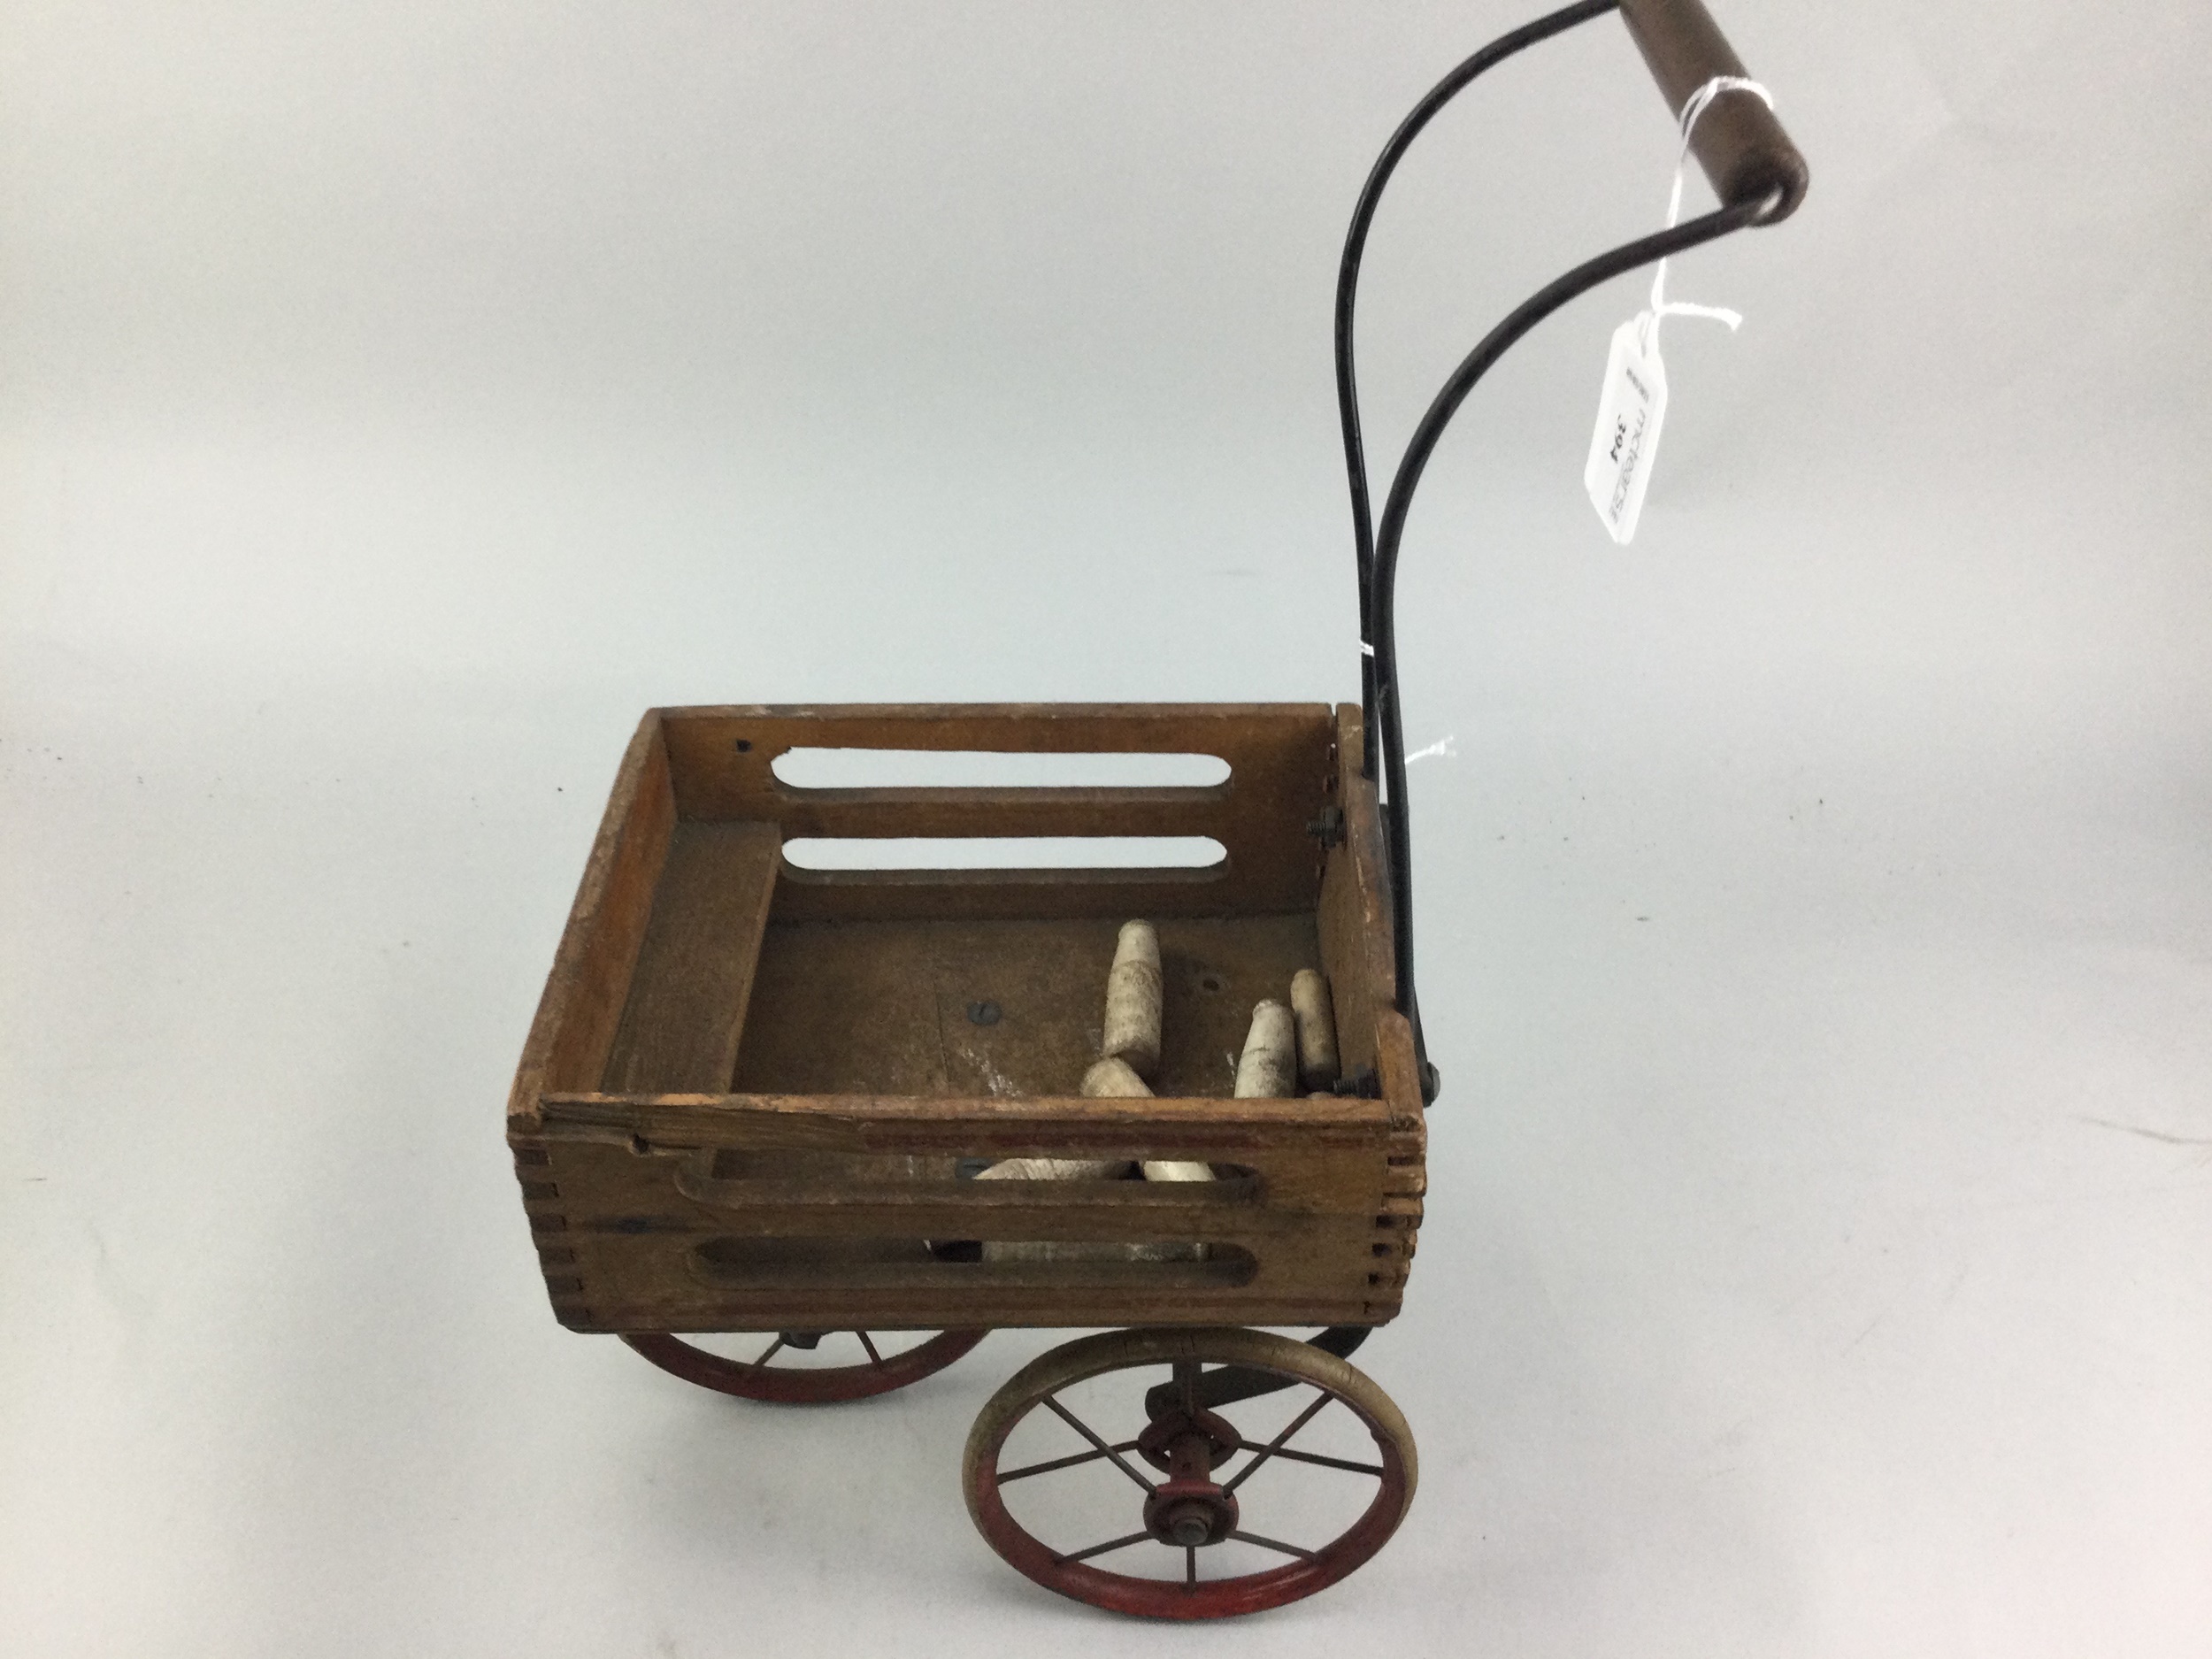 AN EARLY 20TH CENTURY TRI-ANG MODEL DAIRY CART